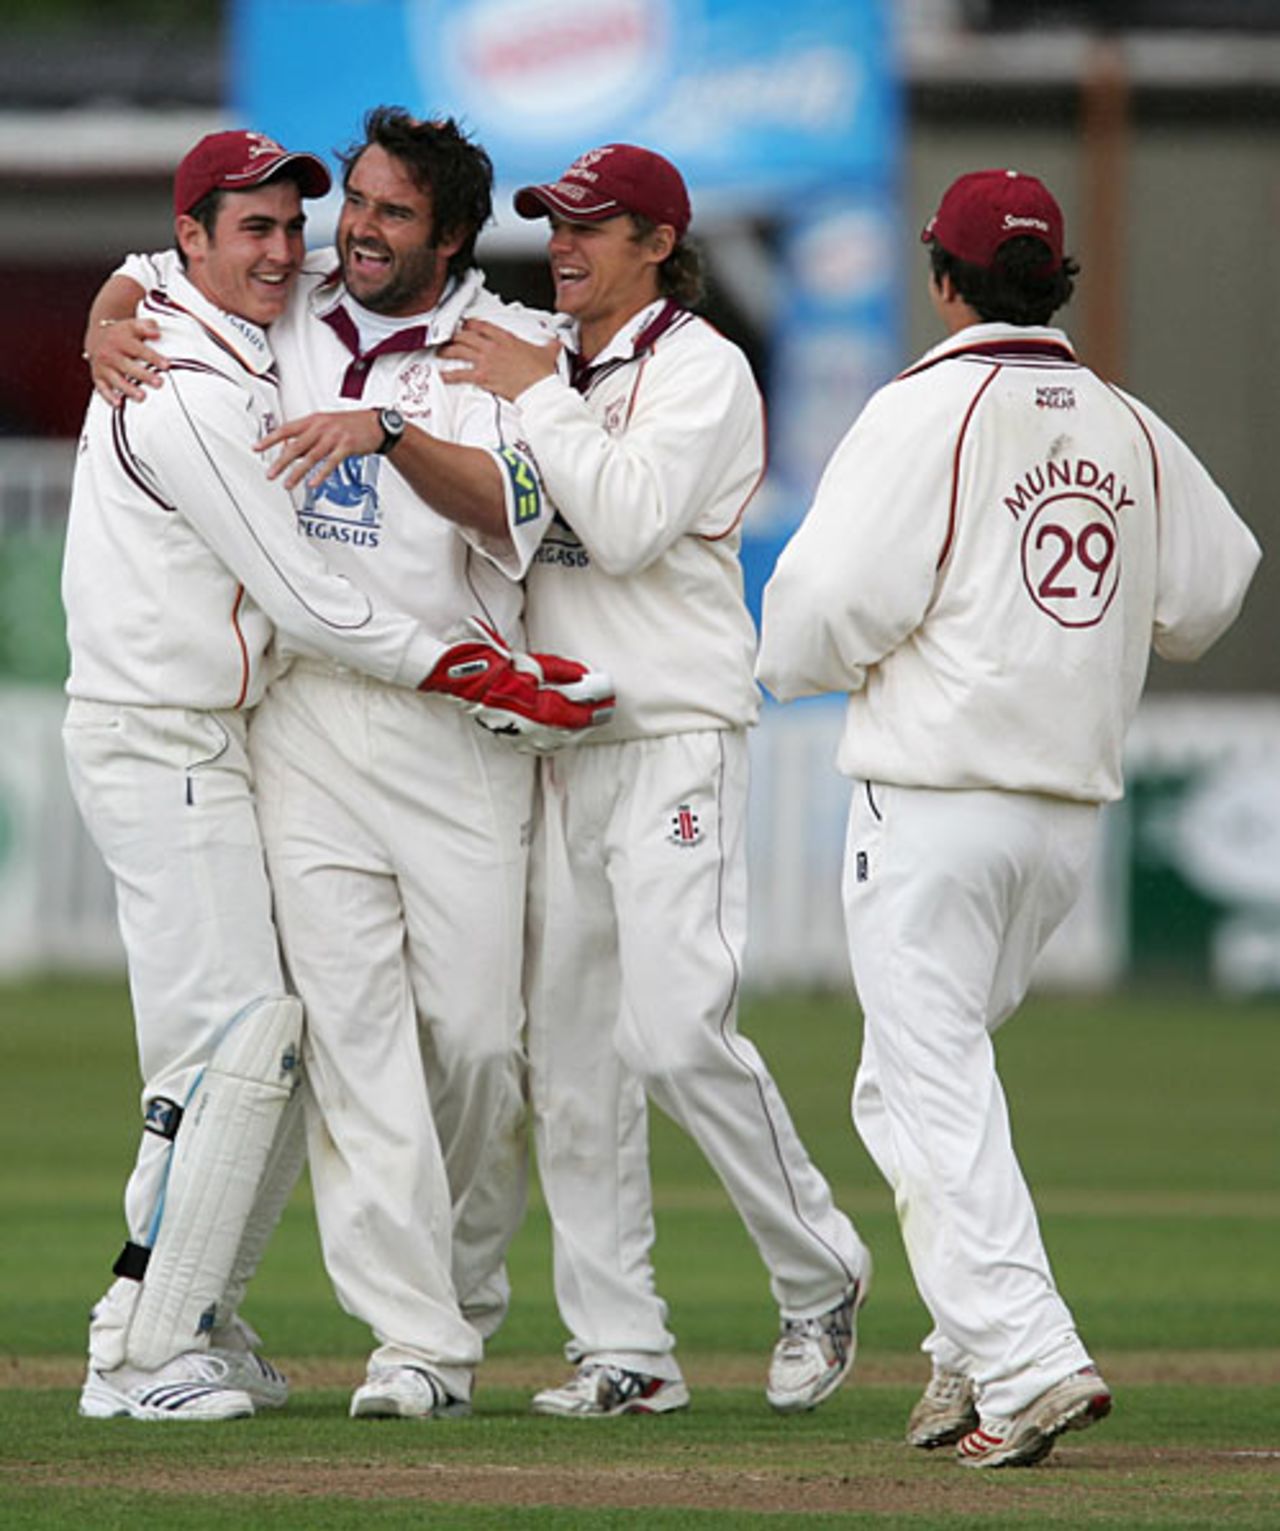 Steffan Jones is congratulated on the early wicket of Daren Ganga, Somerset v West Indians, Taunton, May 12, 2007